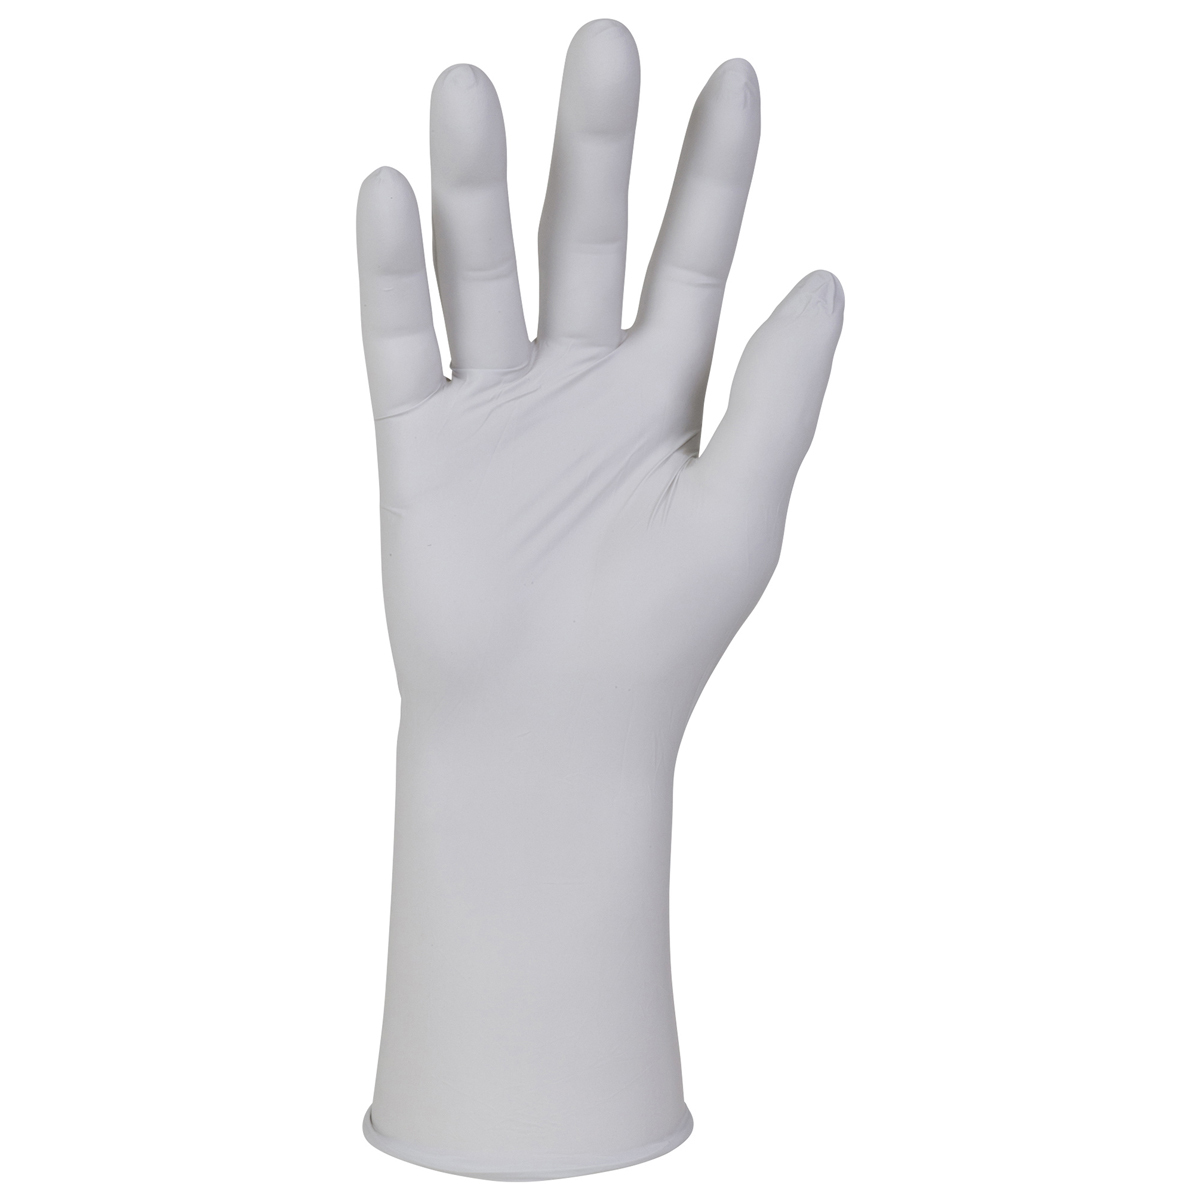 Kimberly-Clark Professional* X-Large Gray Kimtech Pure* G5 Sterling* 4 mil Nitrile Powder-Free Disposable Gloves (250 Gloves Per